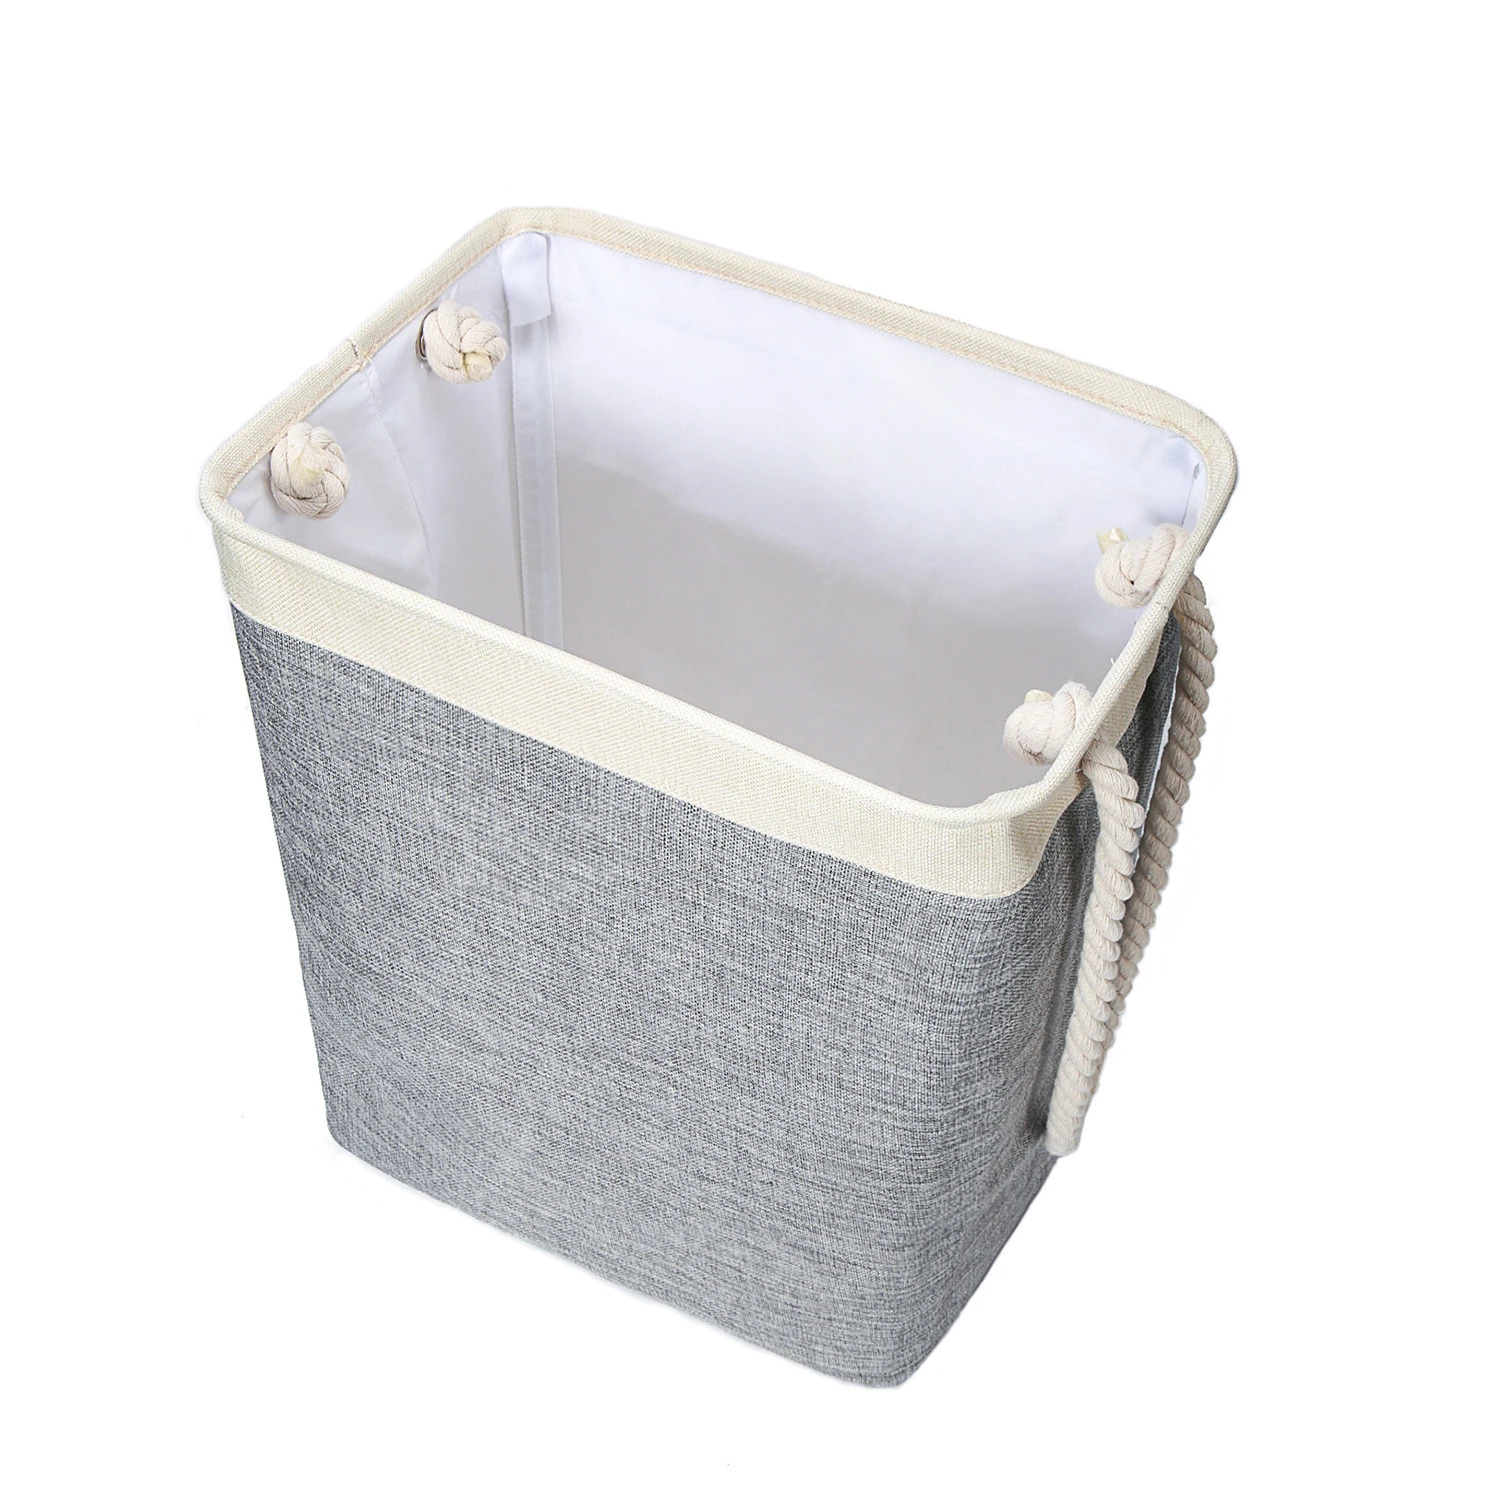 Large Capacity 65L Waterproof Cotton Linen Collapsible Storage Laundry Basket for dirty clothes (3 colors)